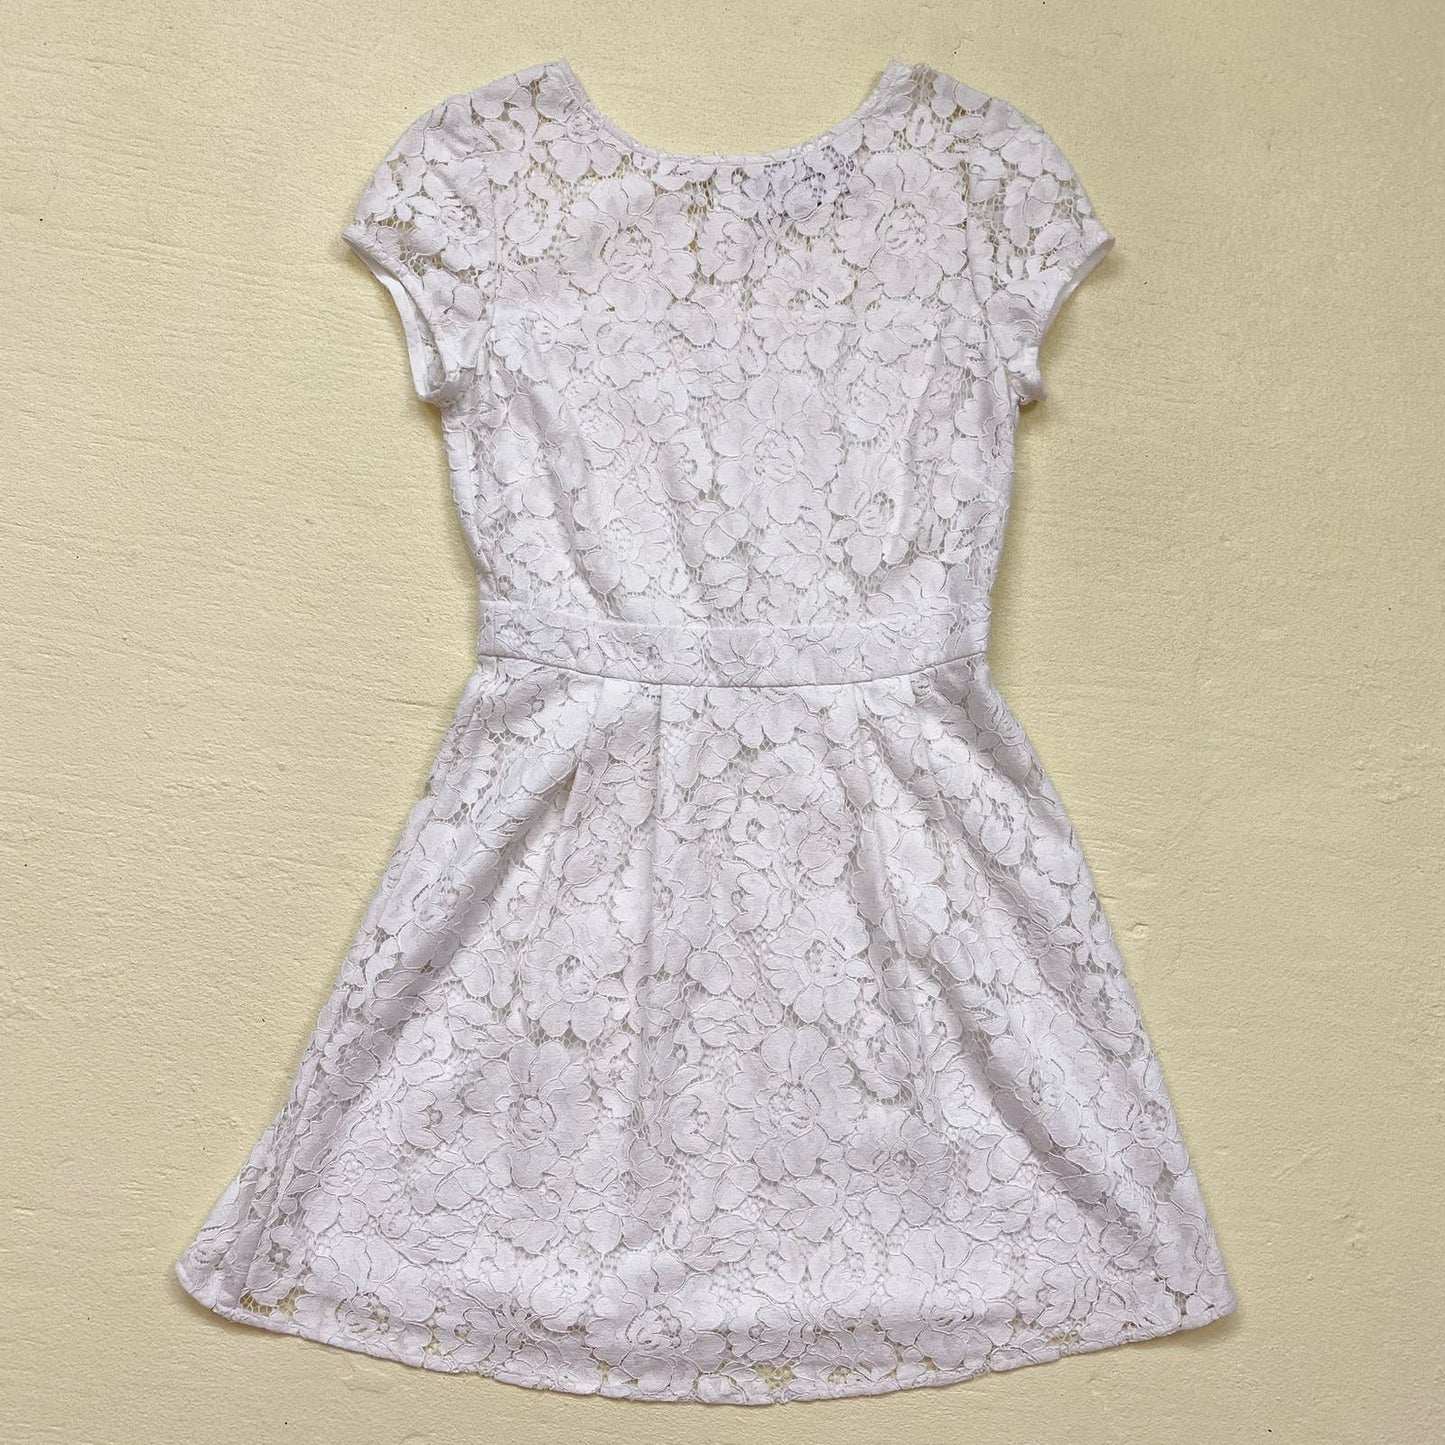 Secondhand Charles Henry Lace Fit & Flare Mini Dress, Size Small